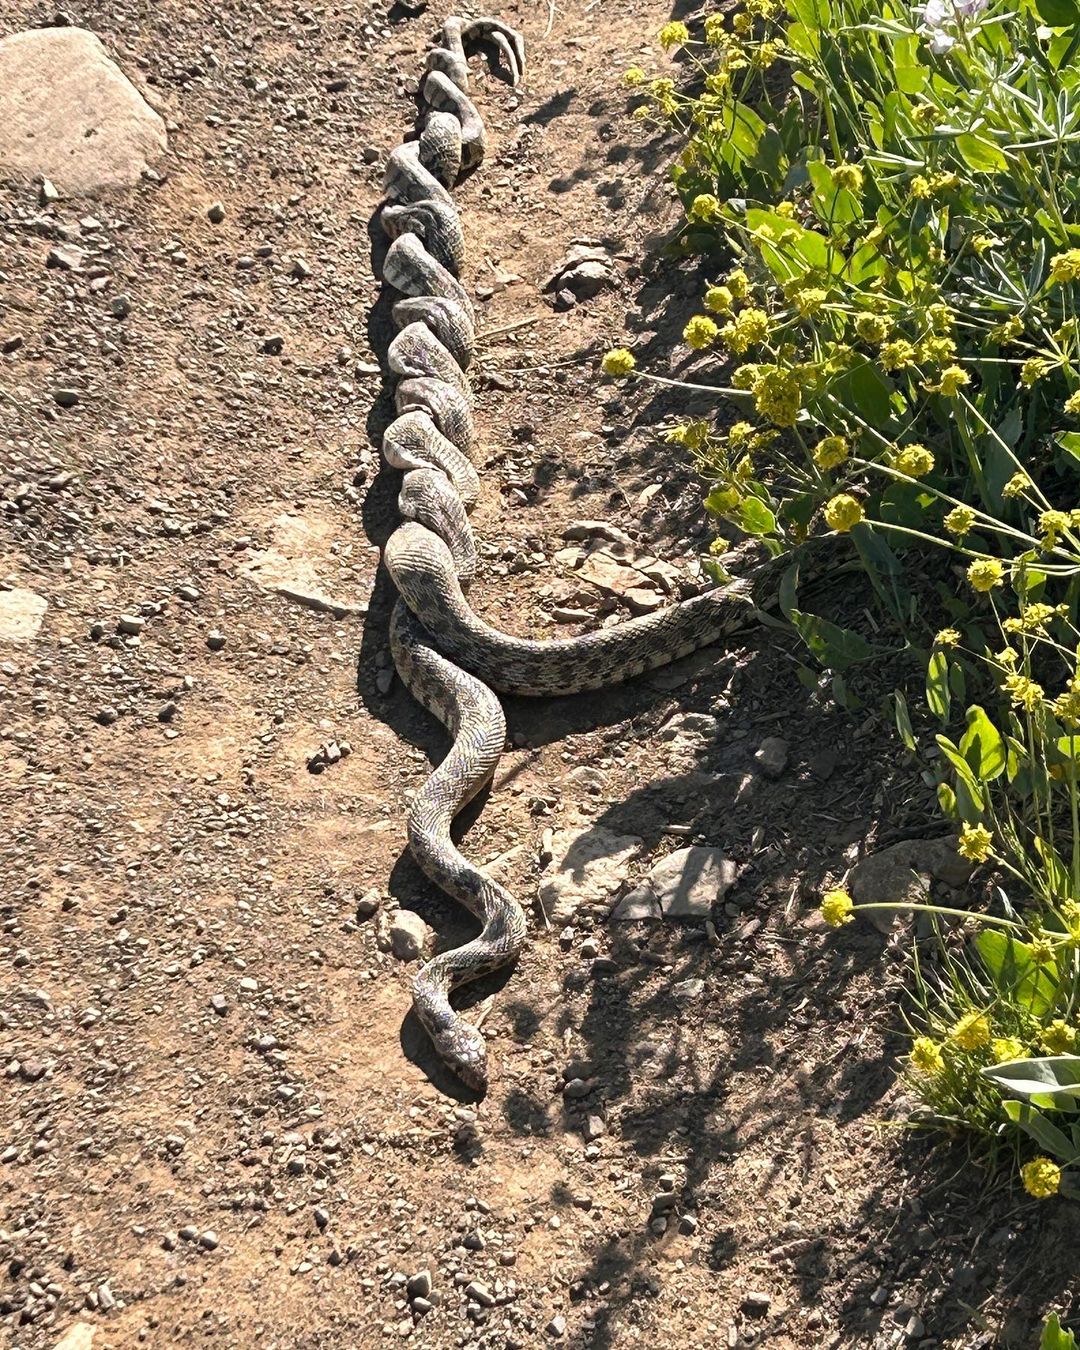 copulating gopher snakes